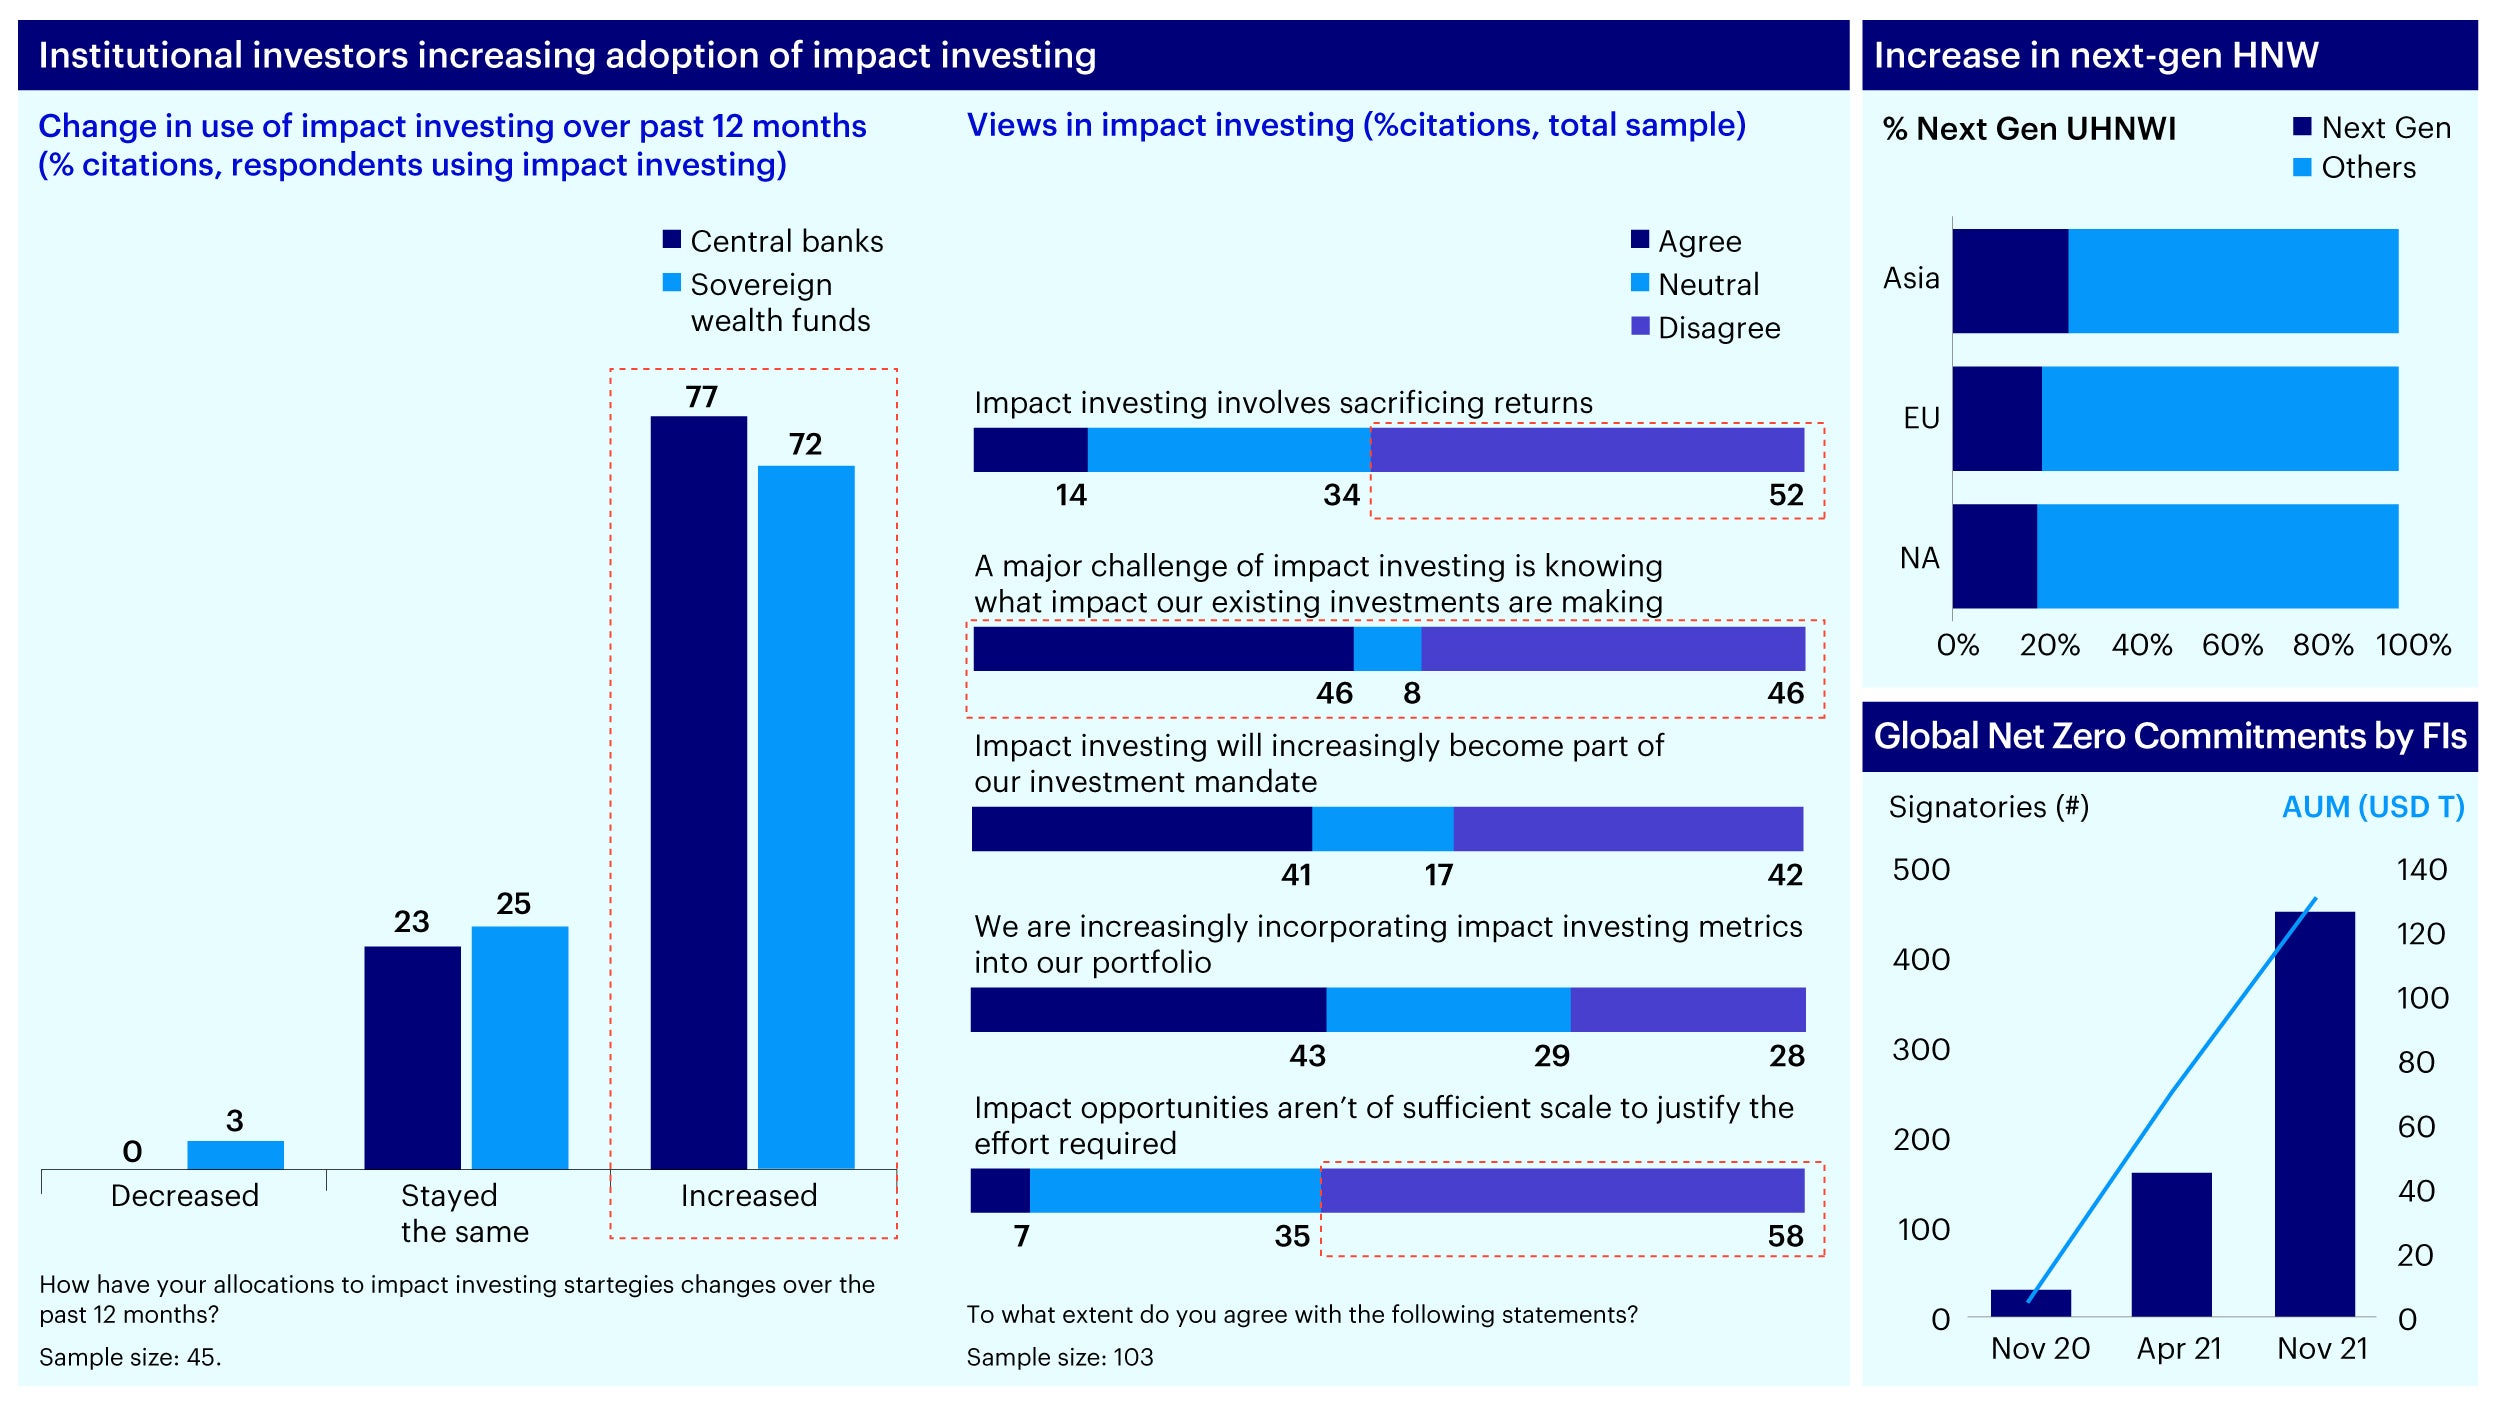 Figure 2 - Market drivers: Impact investing market growth driven by next-gen investors, global net zero commitments and institutional investors interest